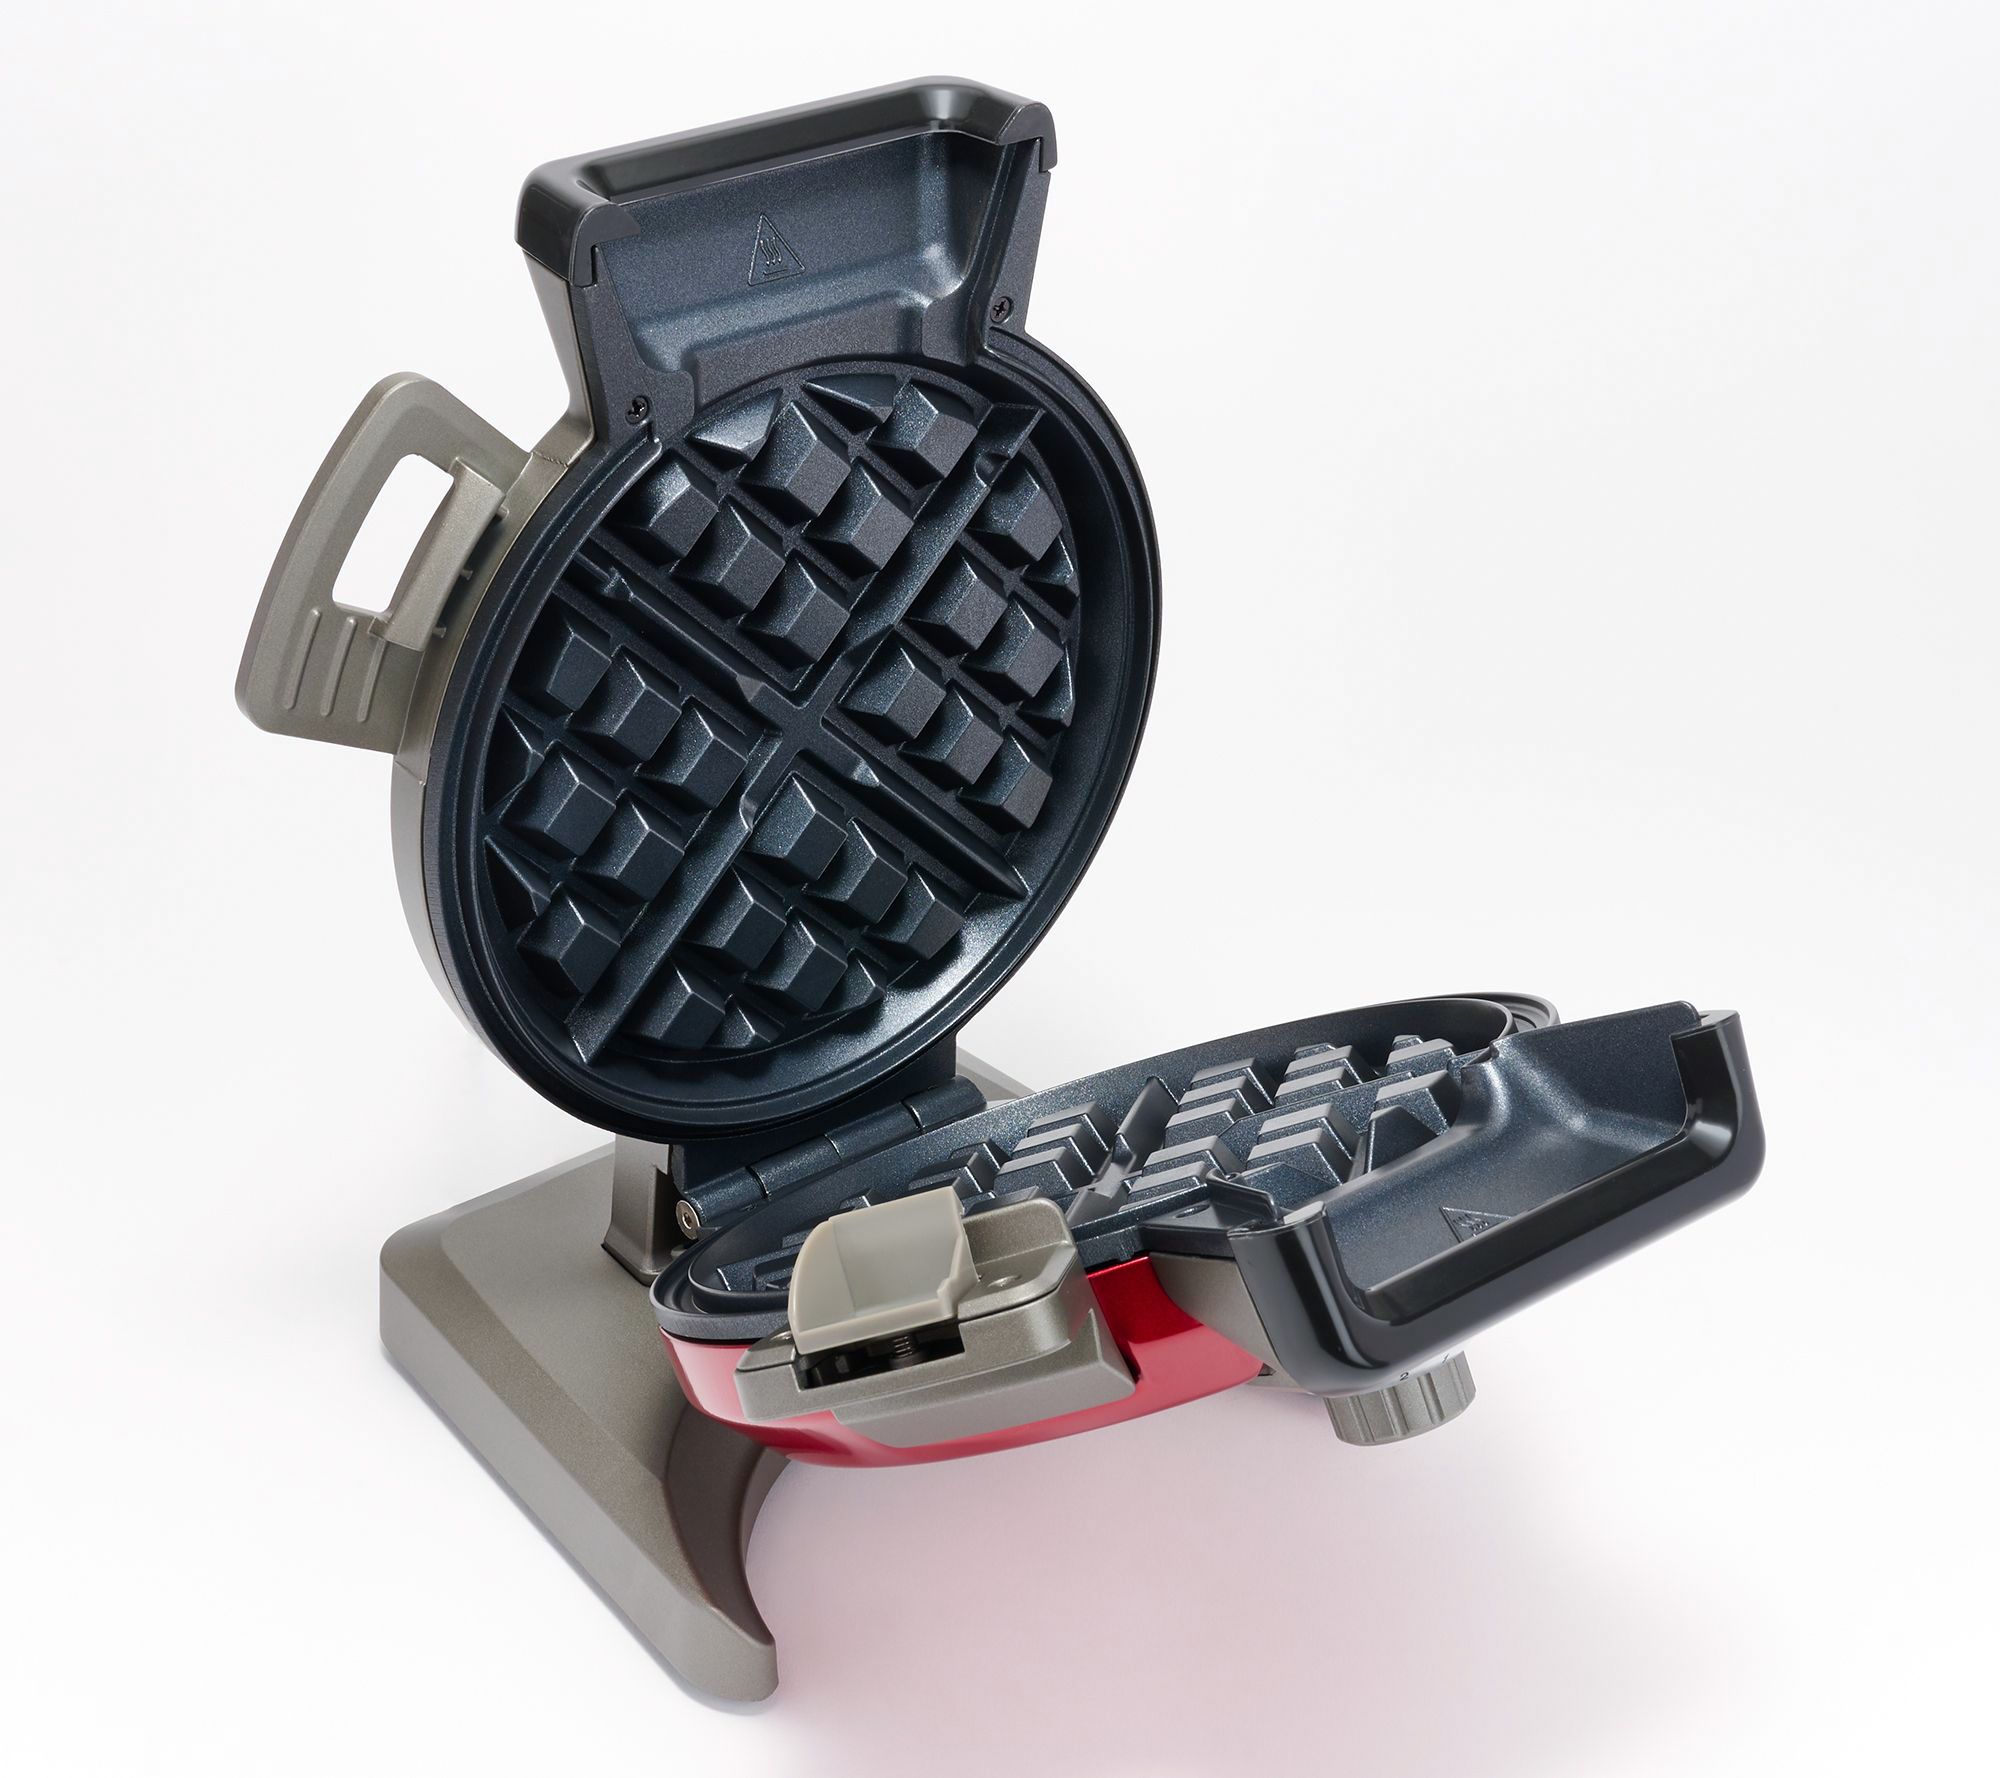 Cuisinart Waffle Maker with Removable Plates